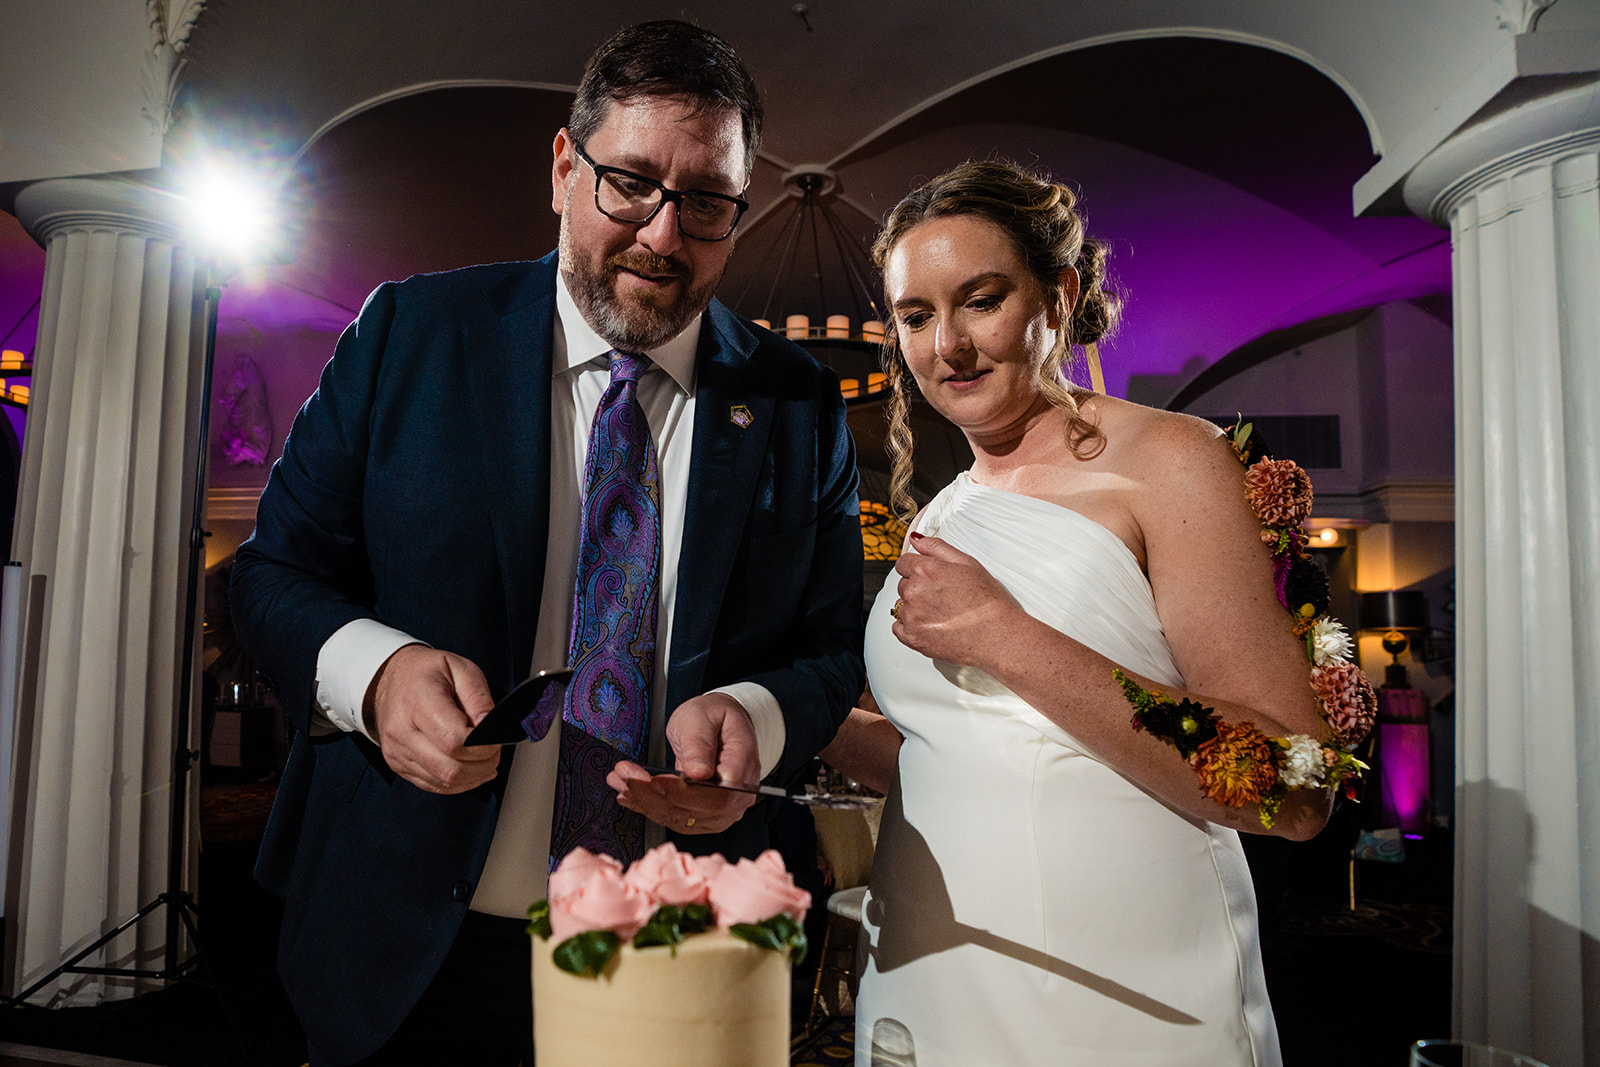 Cake cutting by the bride and groom at the wedding reception at Hotel Monaco in Washington DC by Potok's World Photography